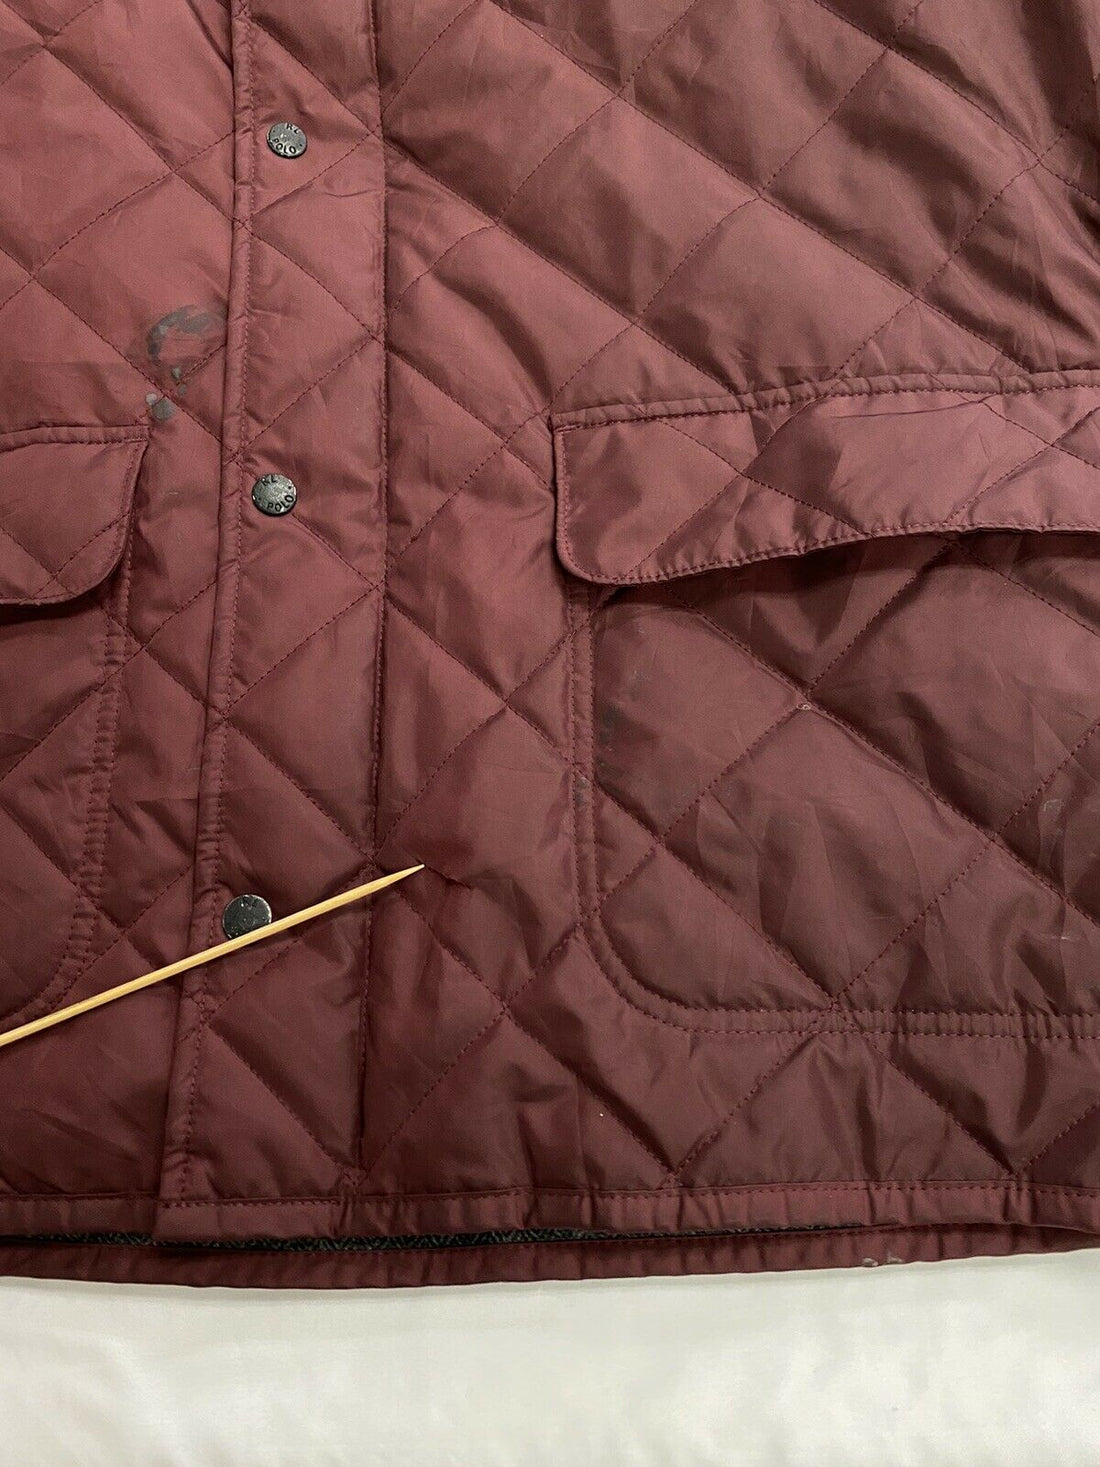 Vintage Polo Ralph Lauren Quilted Coat Jacket Size Large Burgundy Wool Lined